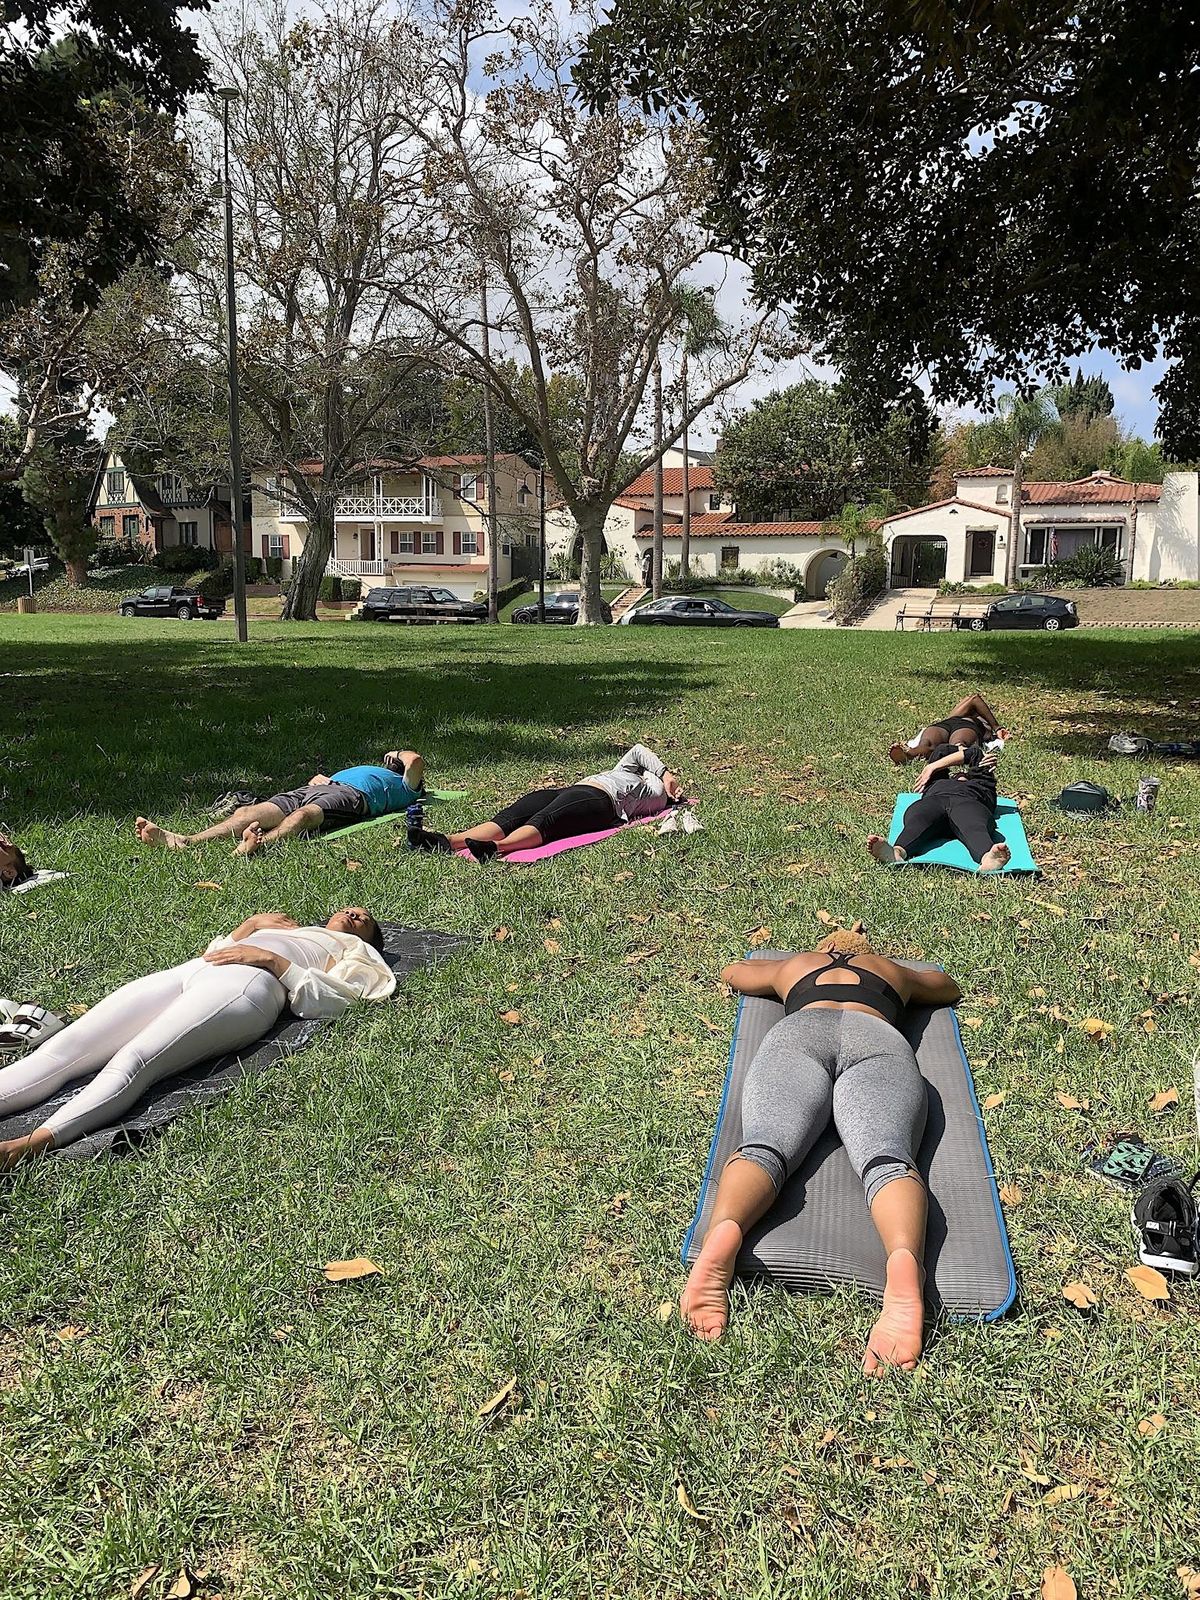 A Mindfulness Moment: Yoga In The Park